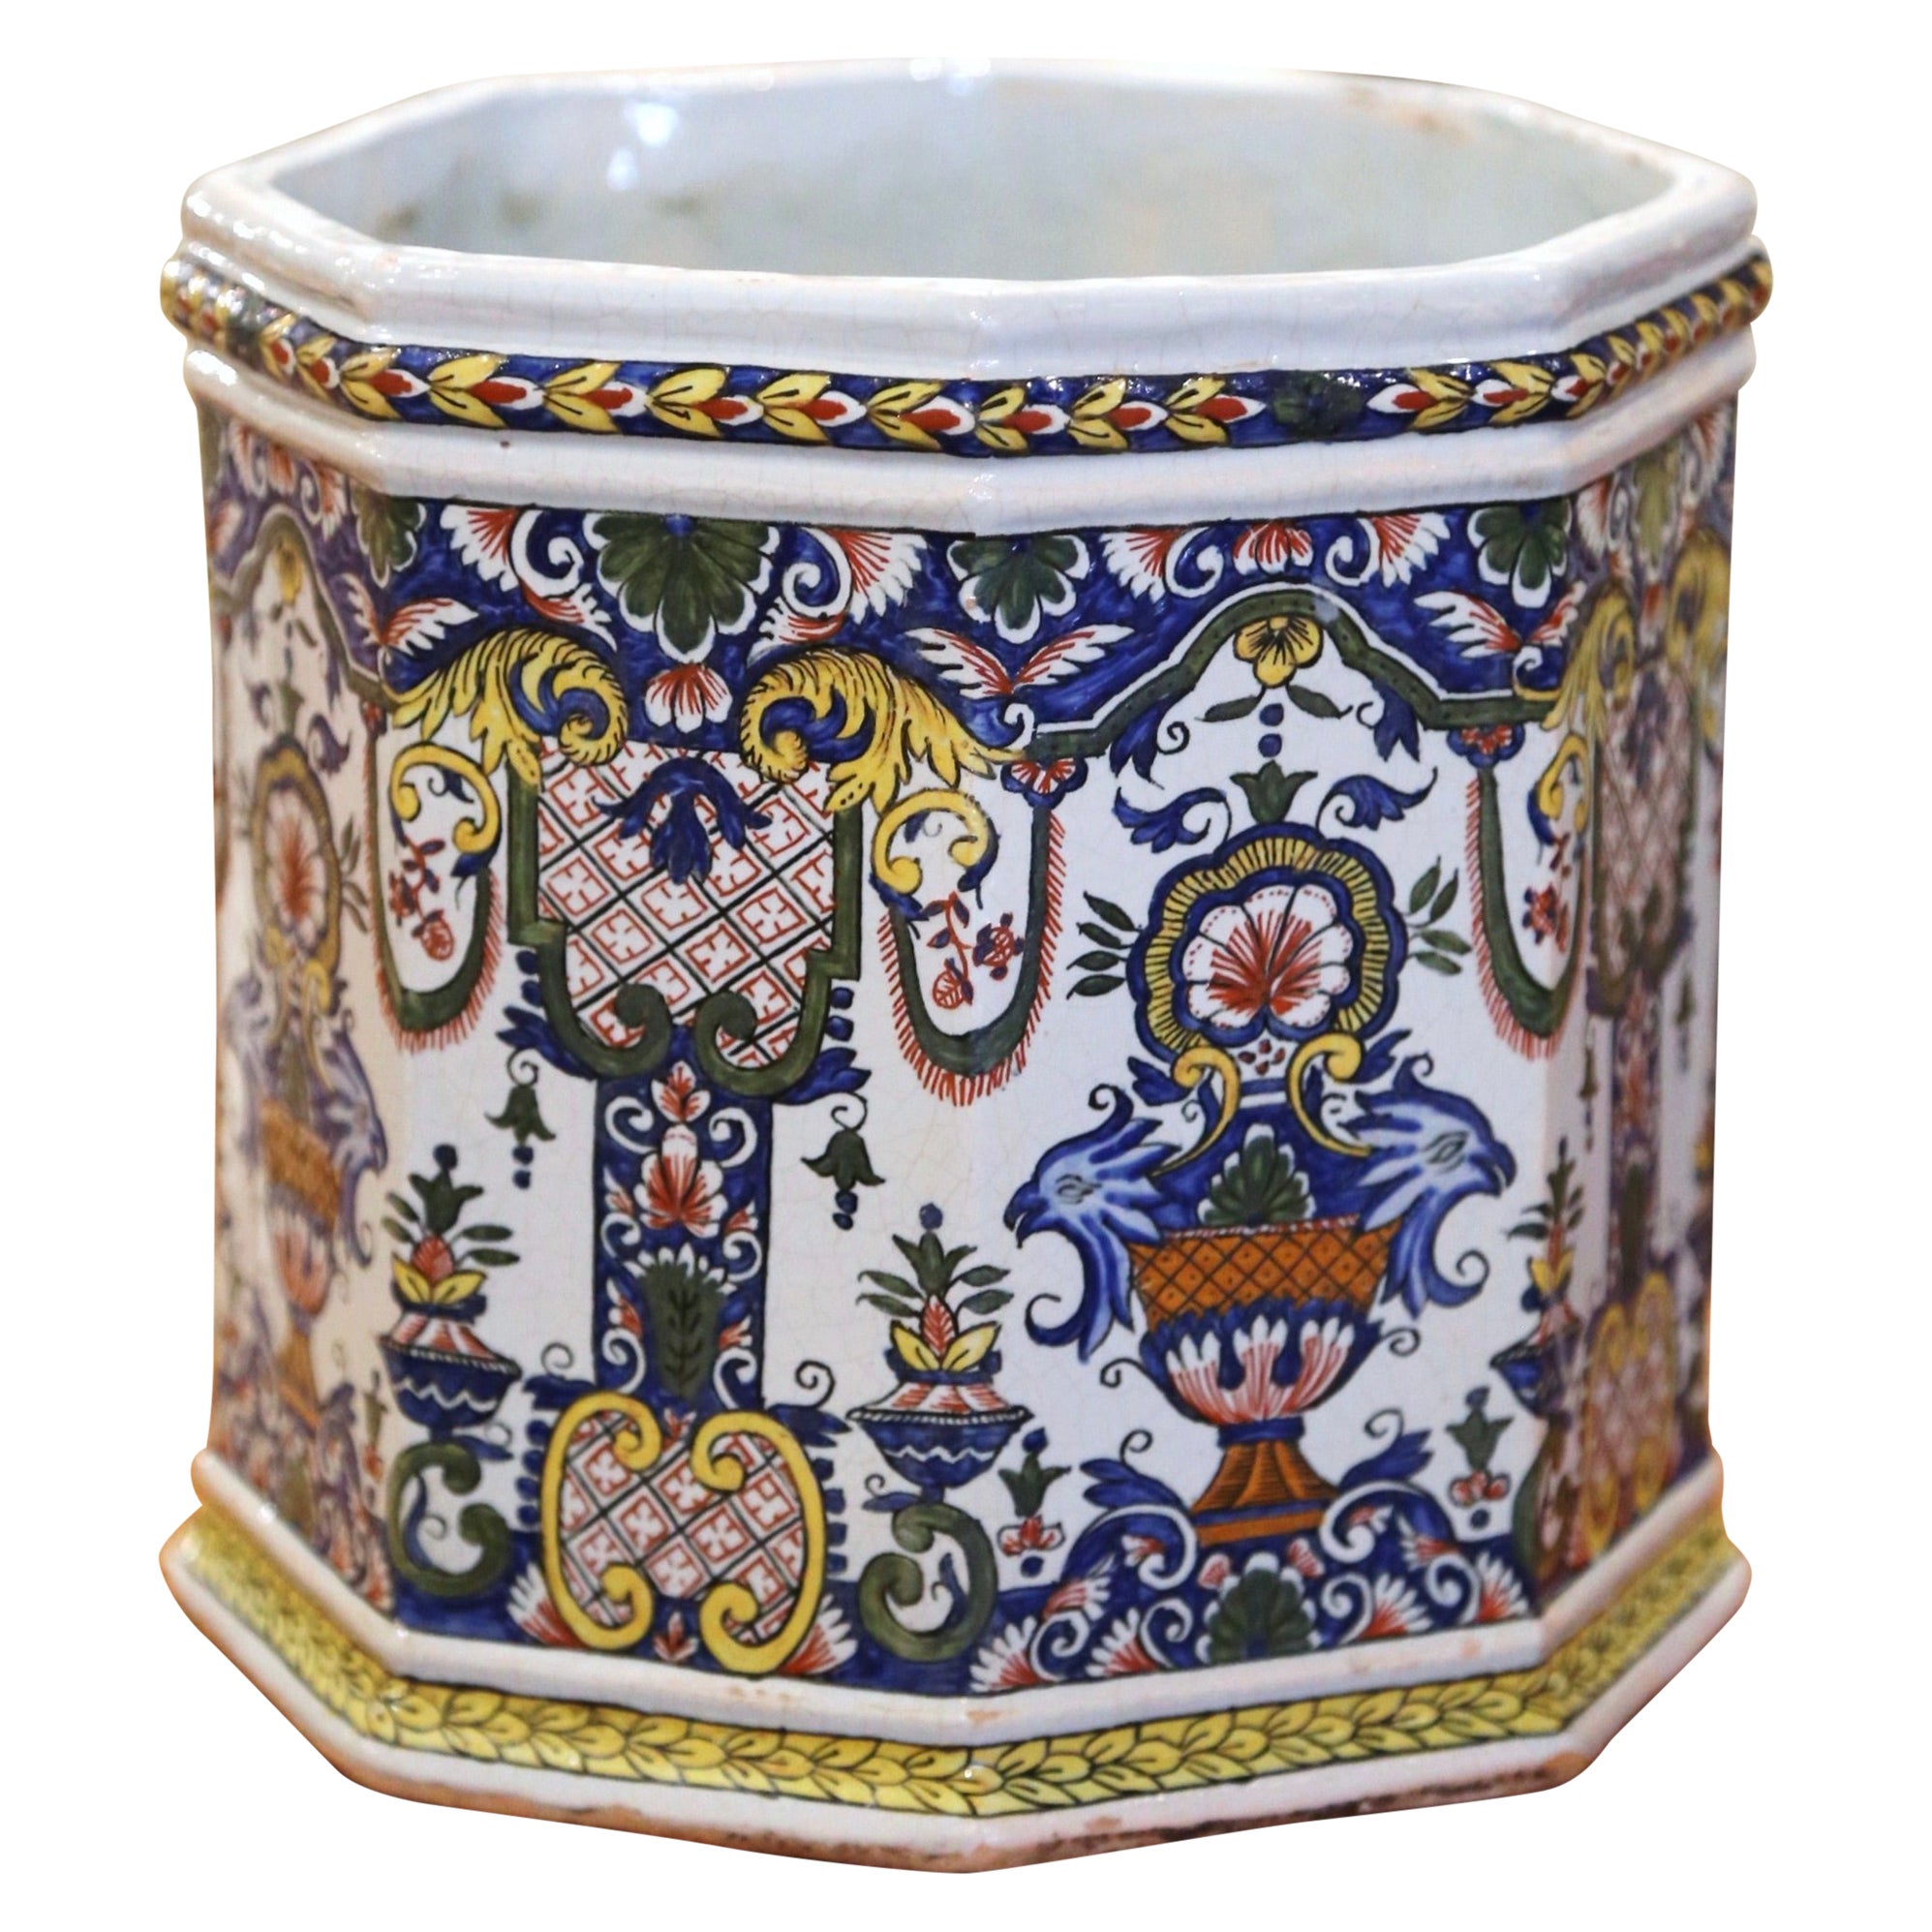 19th Century French Hand-Painted Faience Cache Pot from Desvres